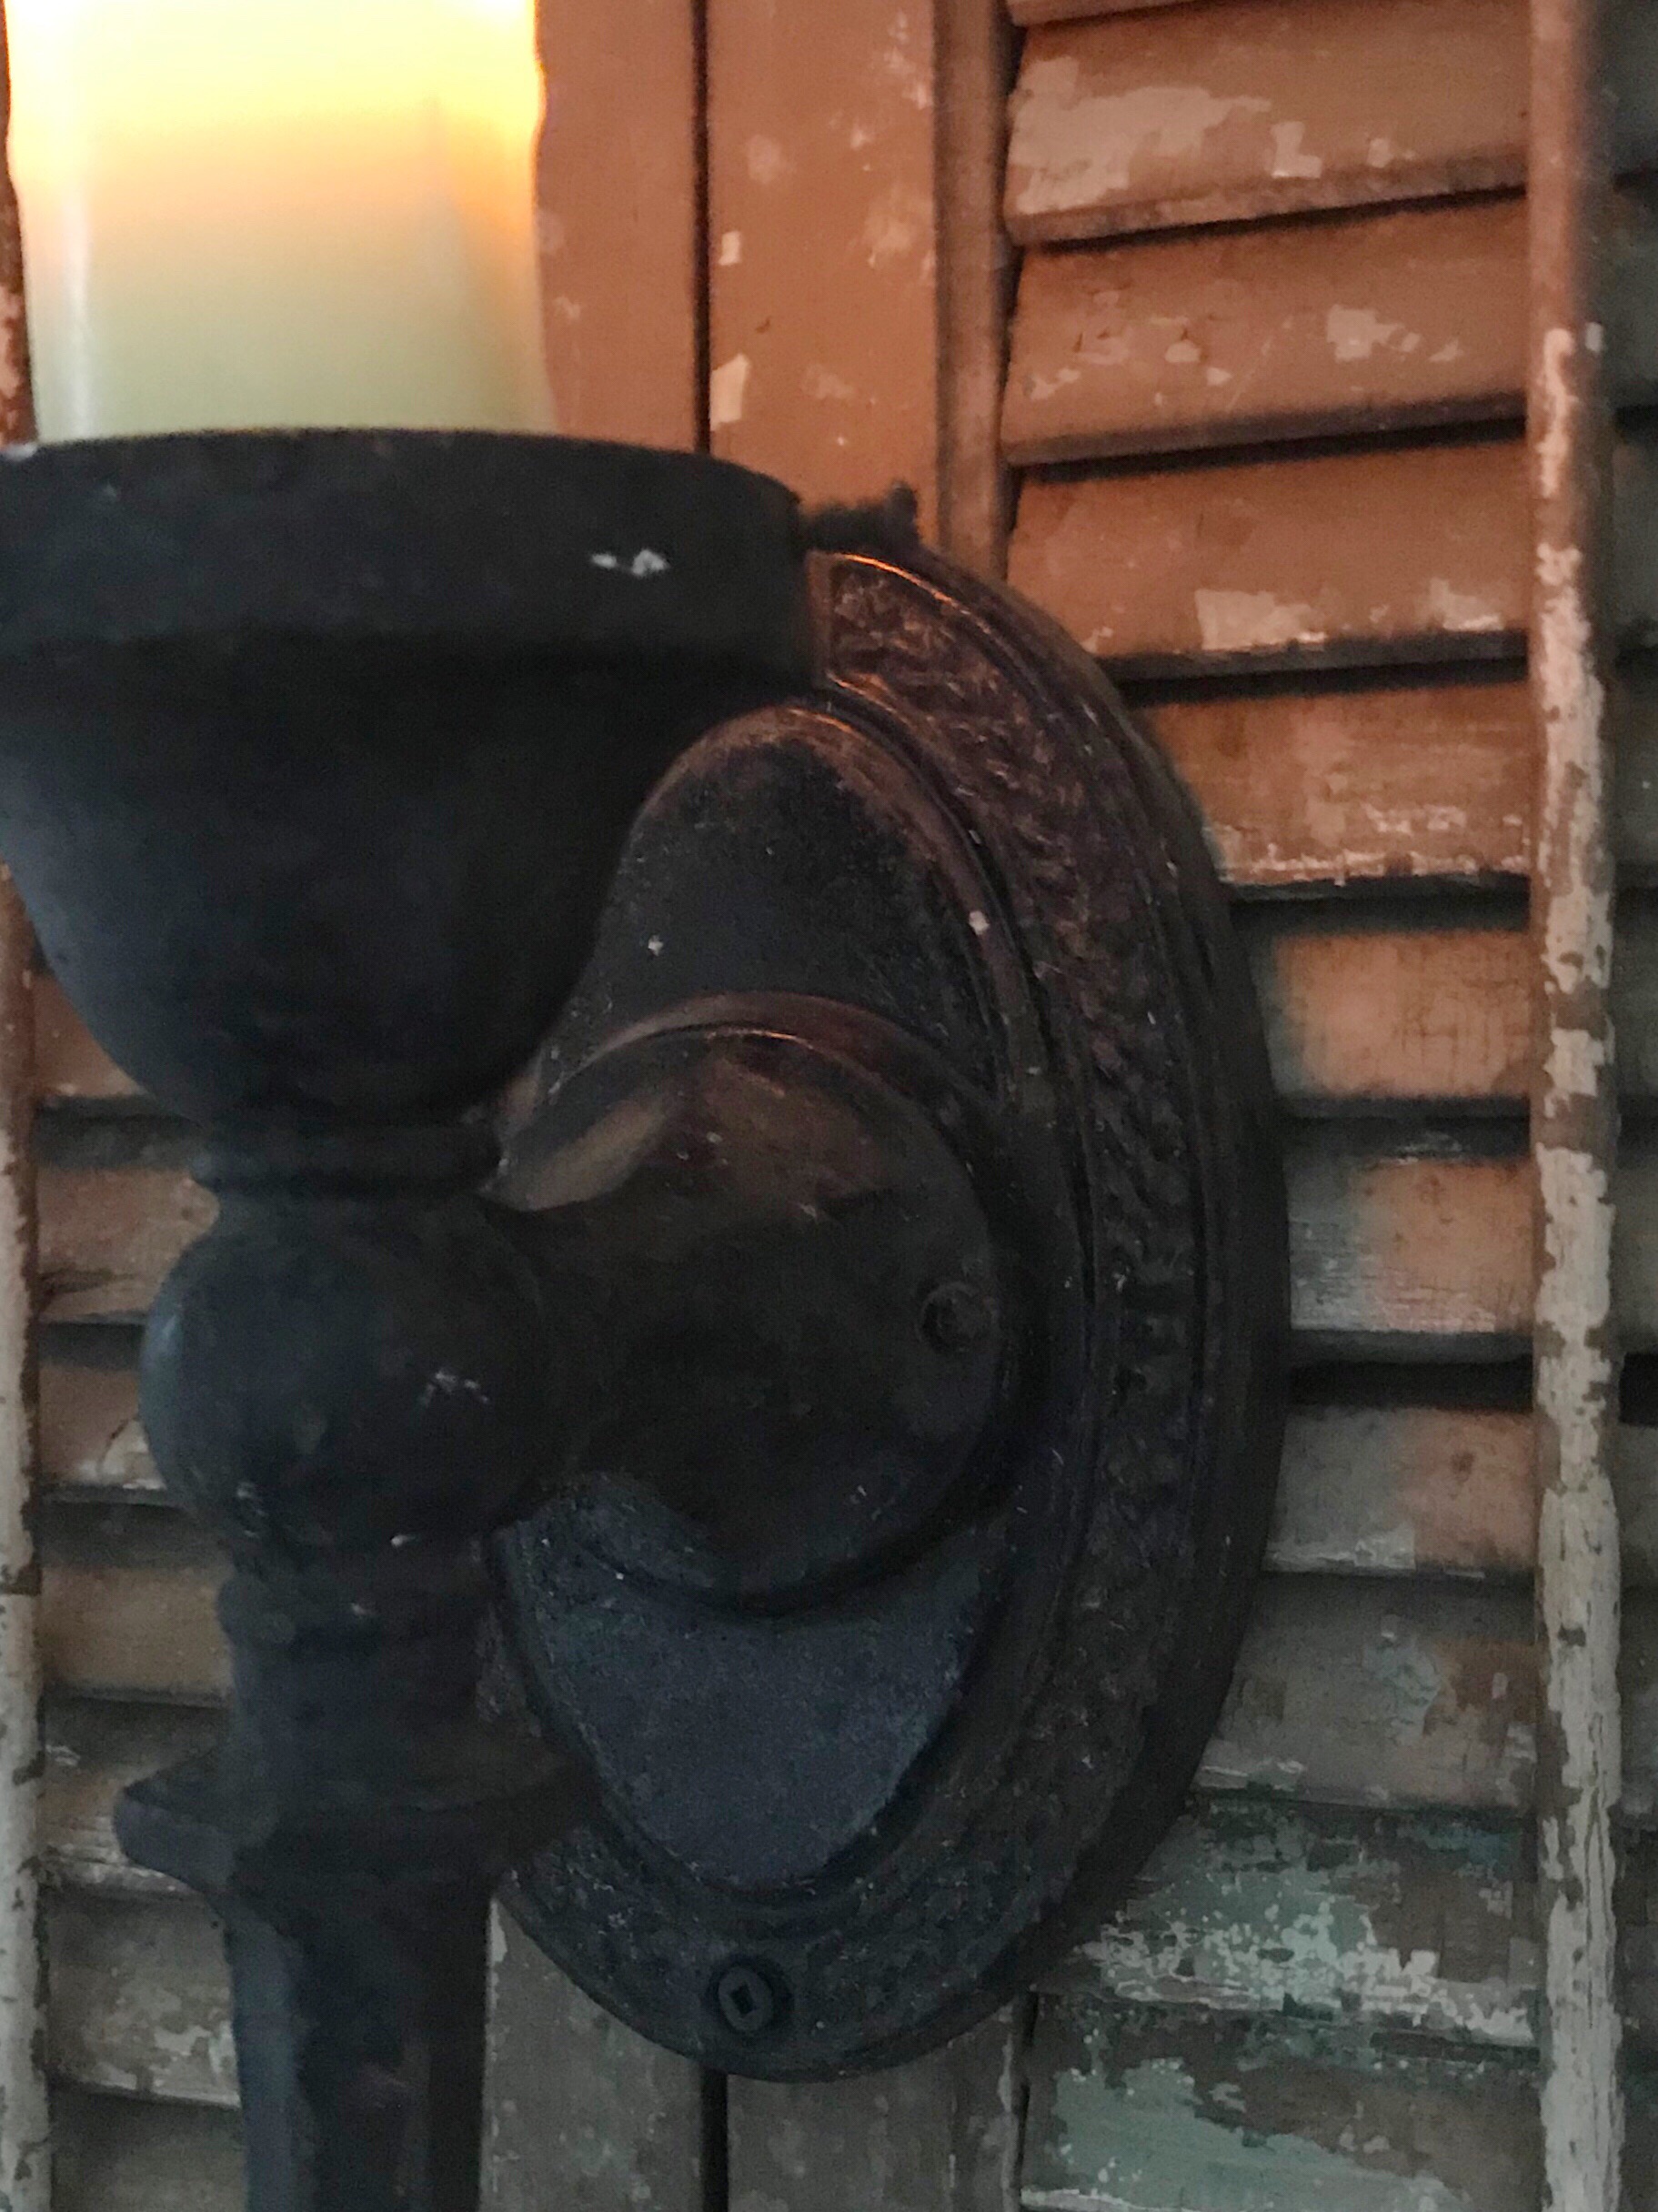 Repurposing Old Wall Sconces - House on Winchester